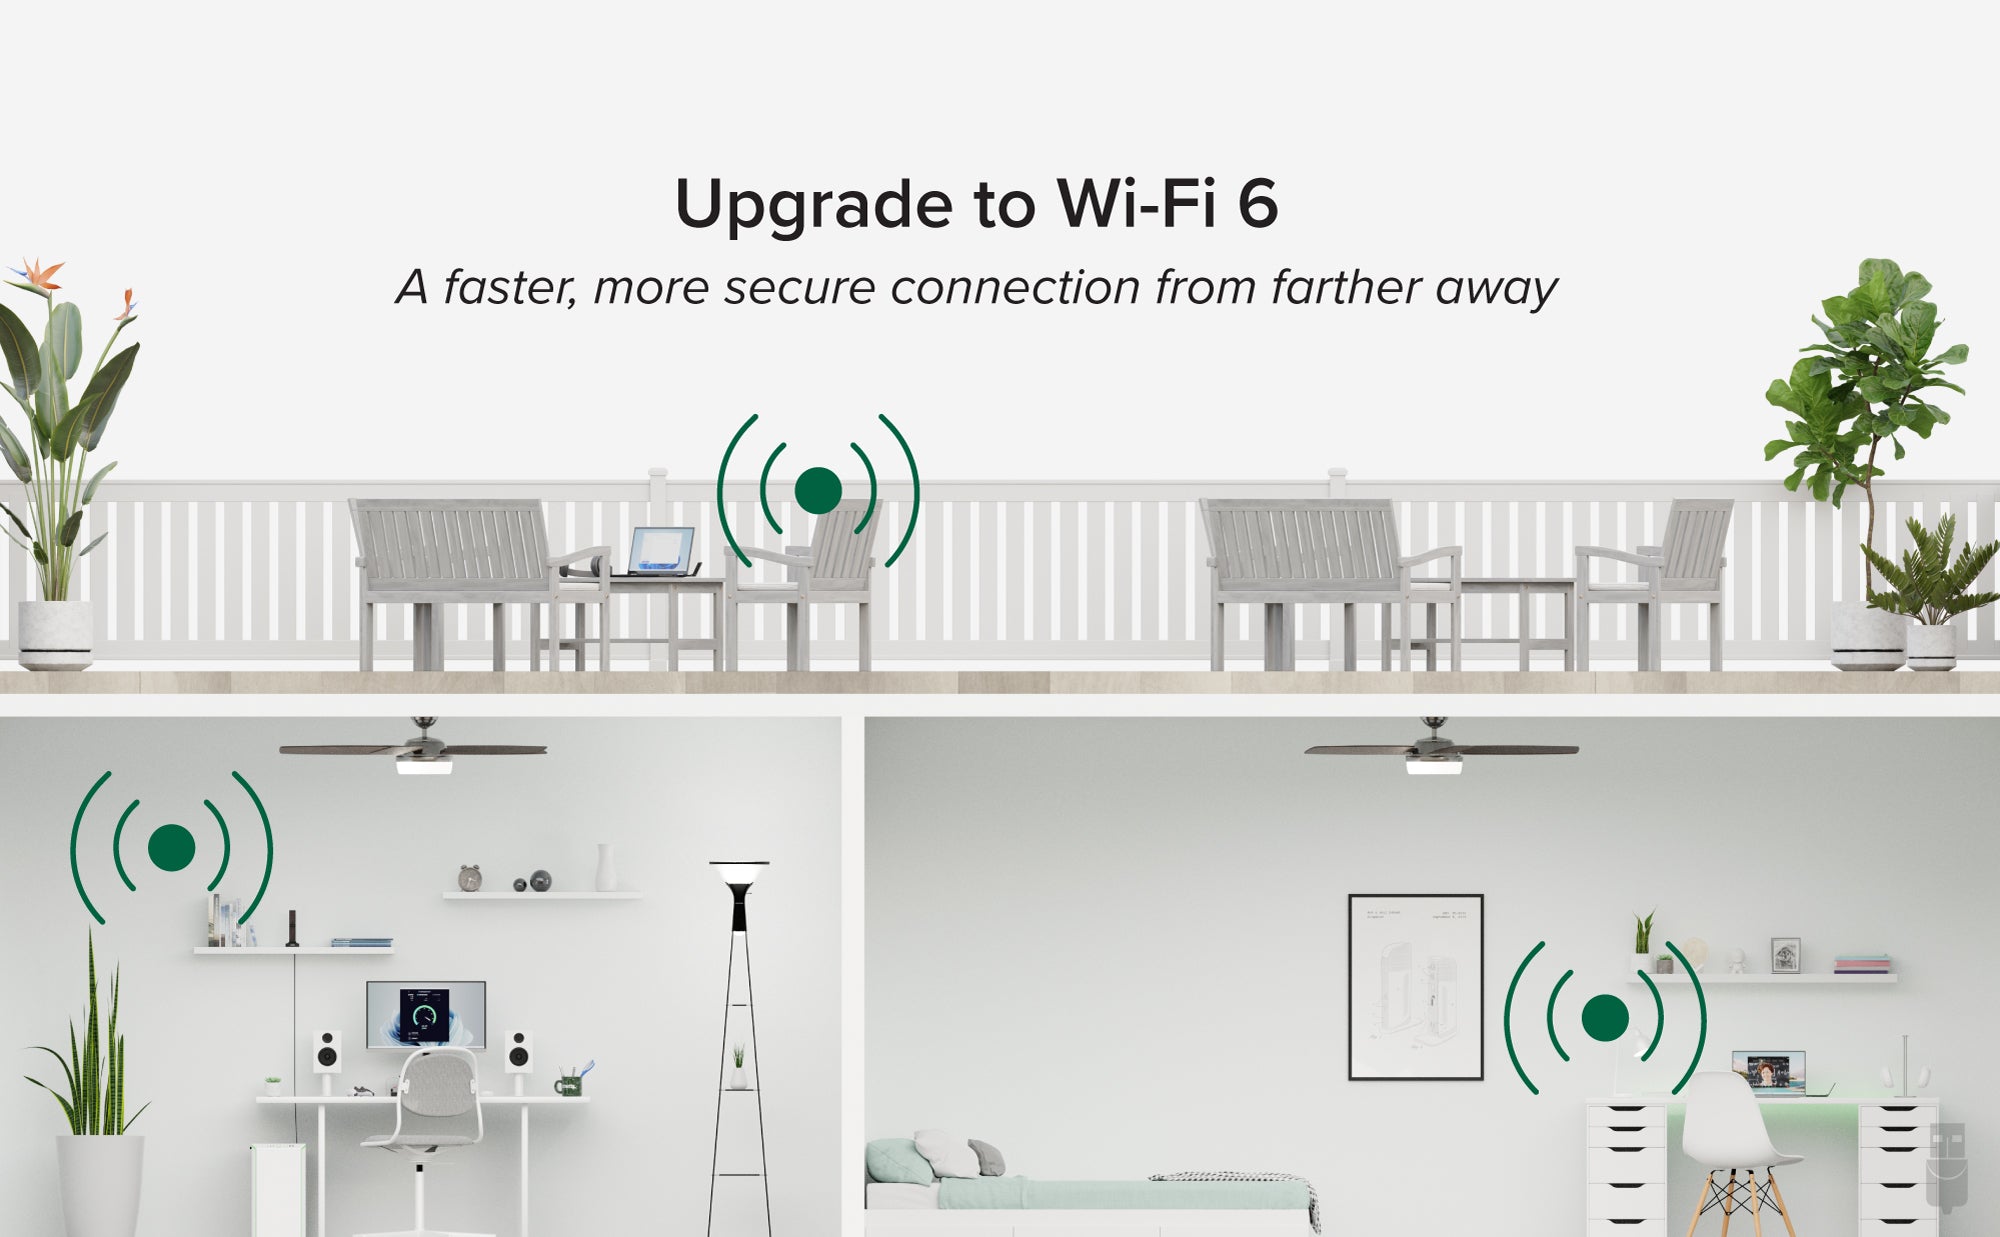 Upgrade to Wi-Fi 6 A faster, more secure connection from farther away